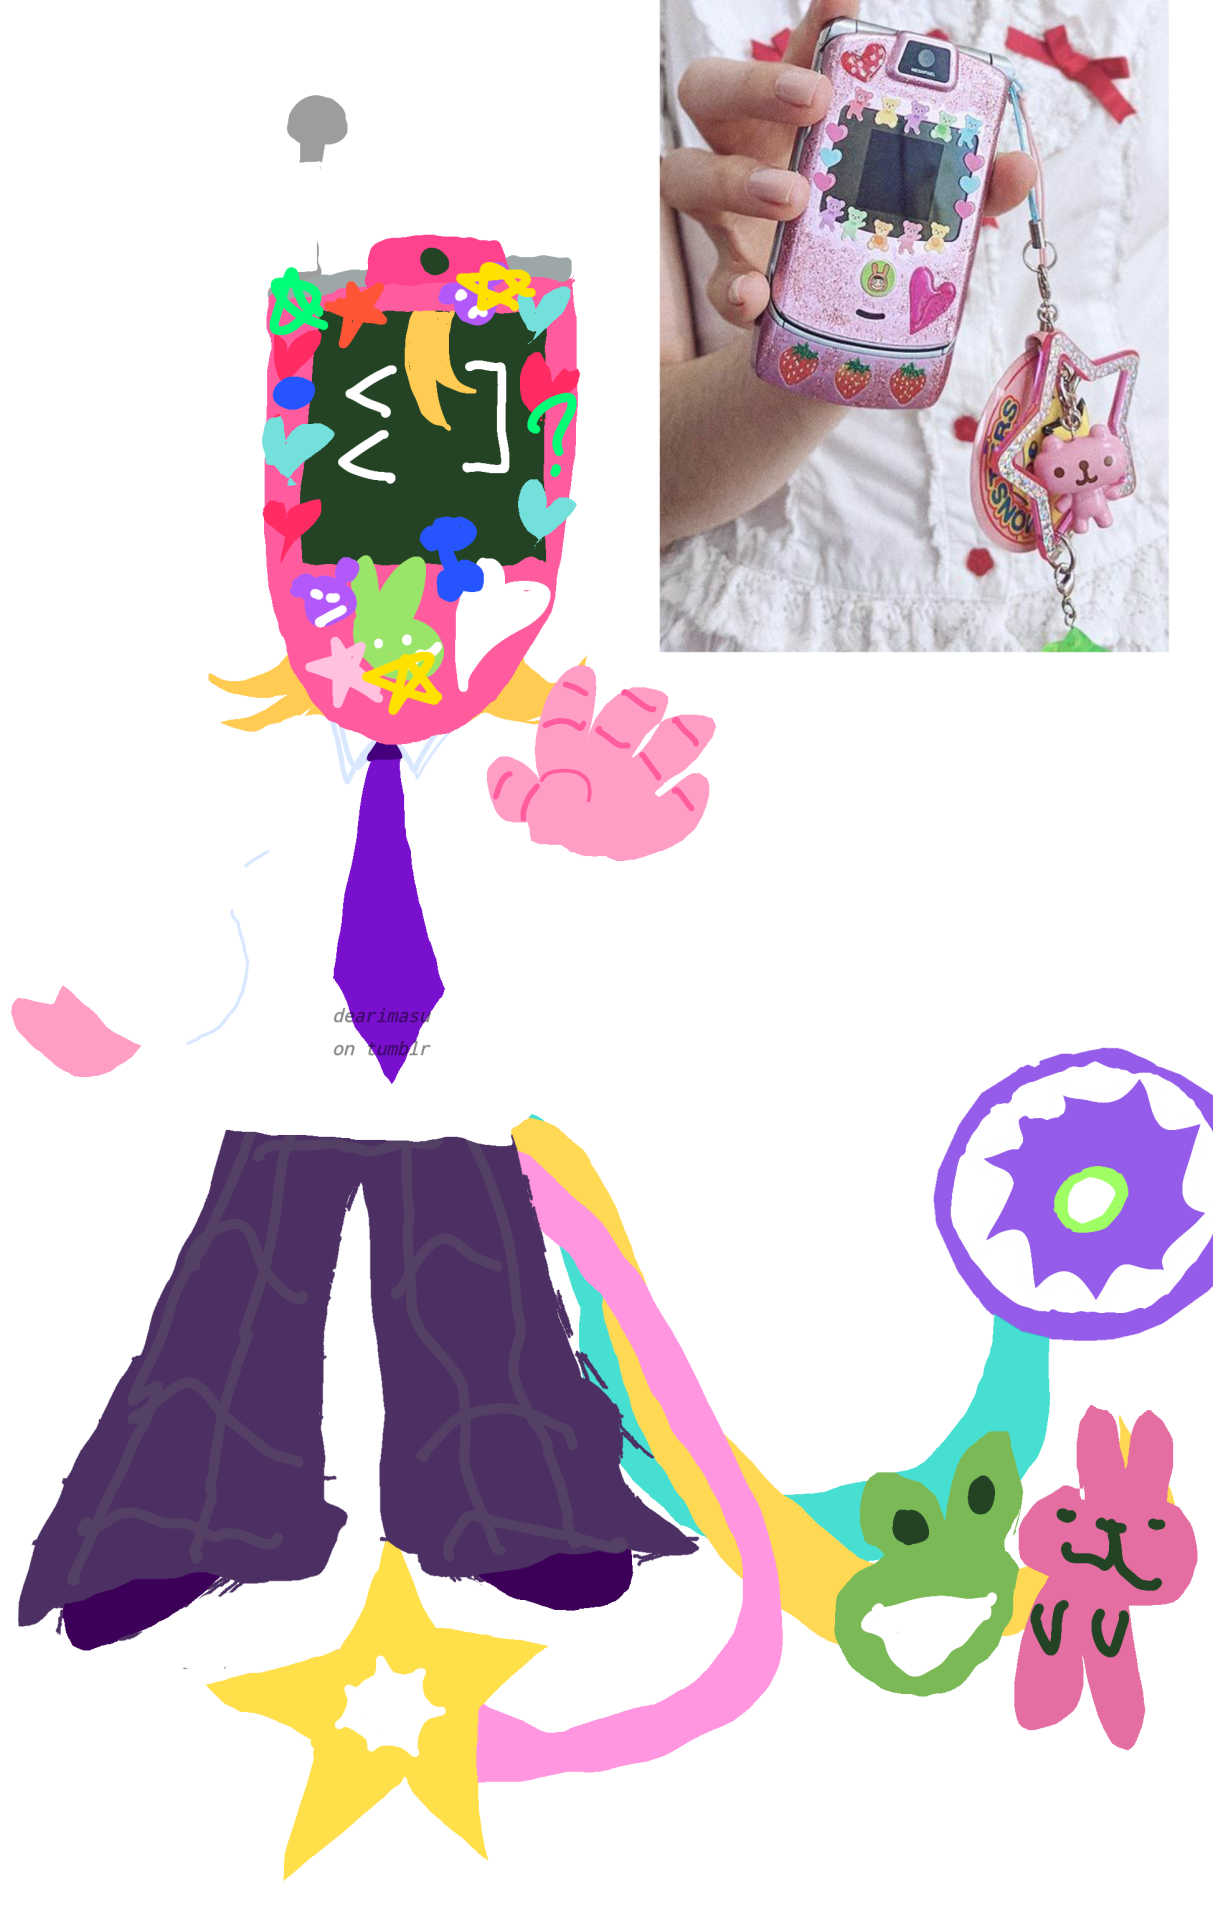 Teru as a robotic object head. He has a pink flip phone for a head, which is decorated with various stickers and an assortment of keychains serving as a tail.